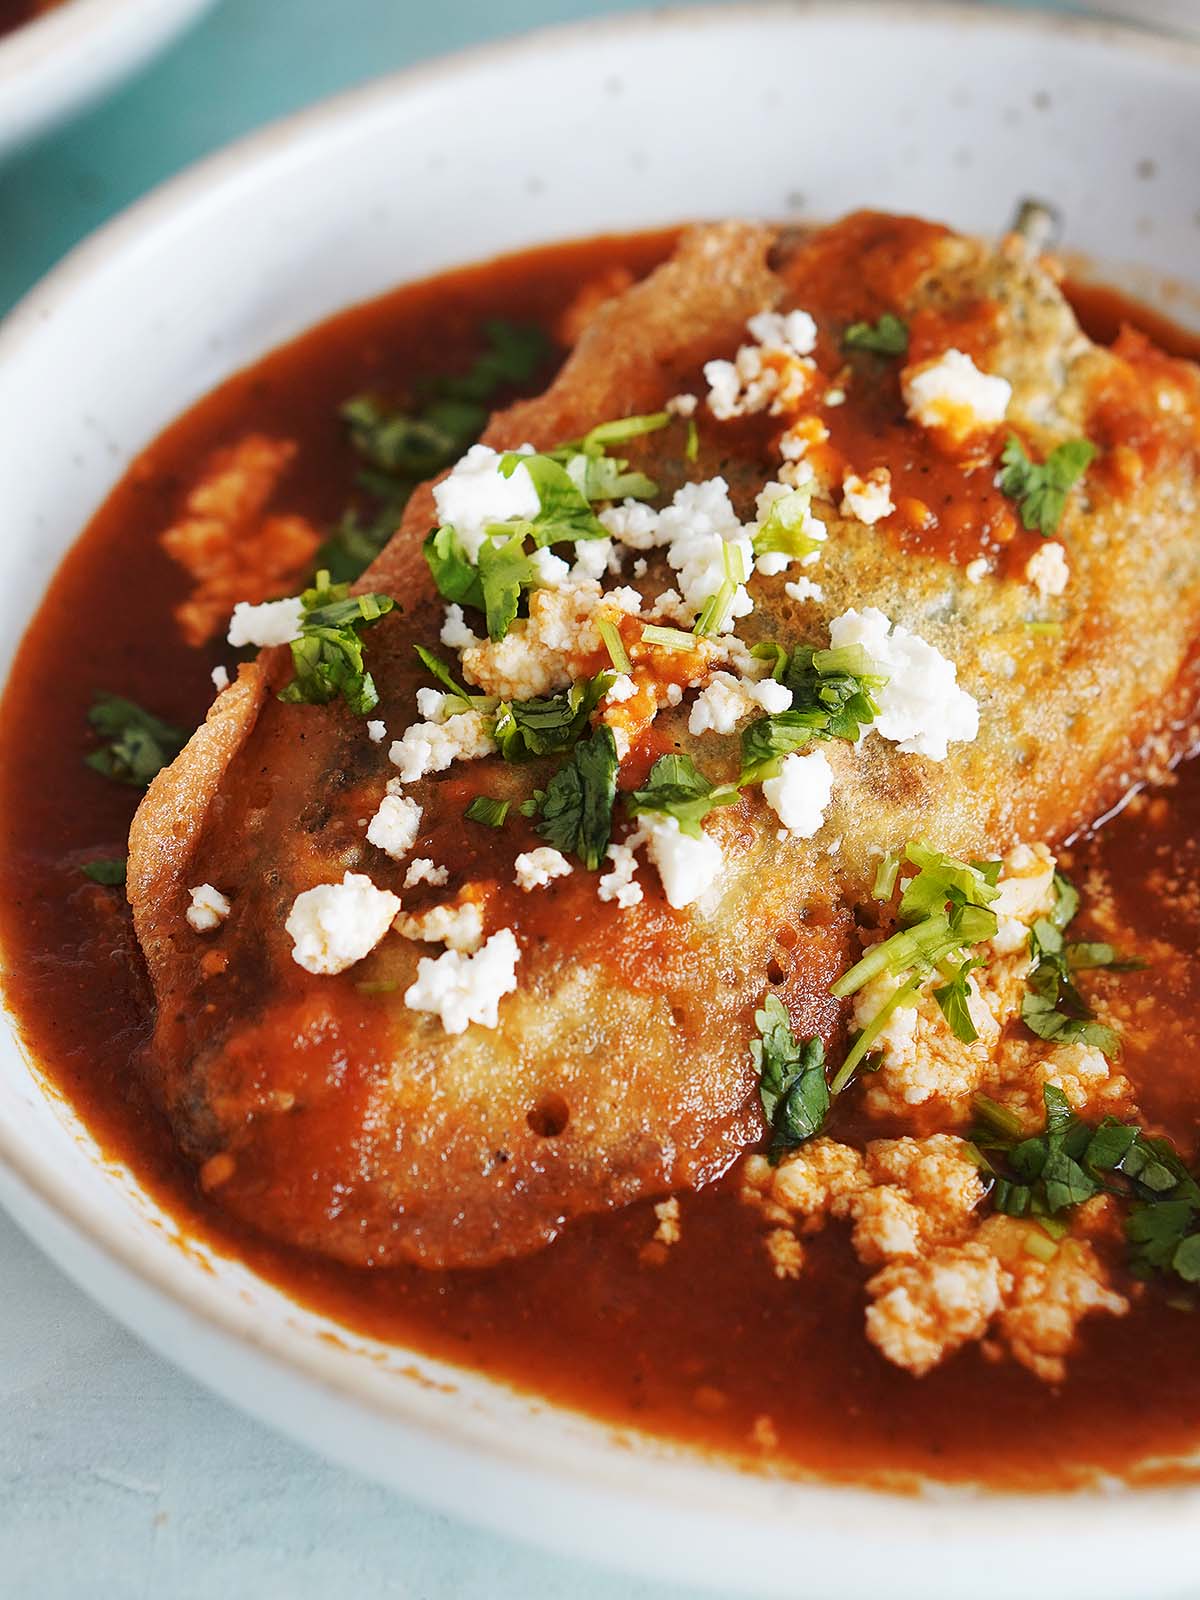 A chili relleno on a wide bowl with tomato sauce on the bottom.